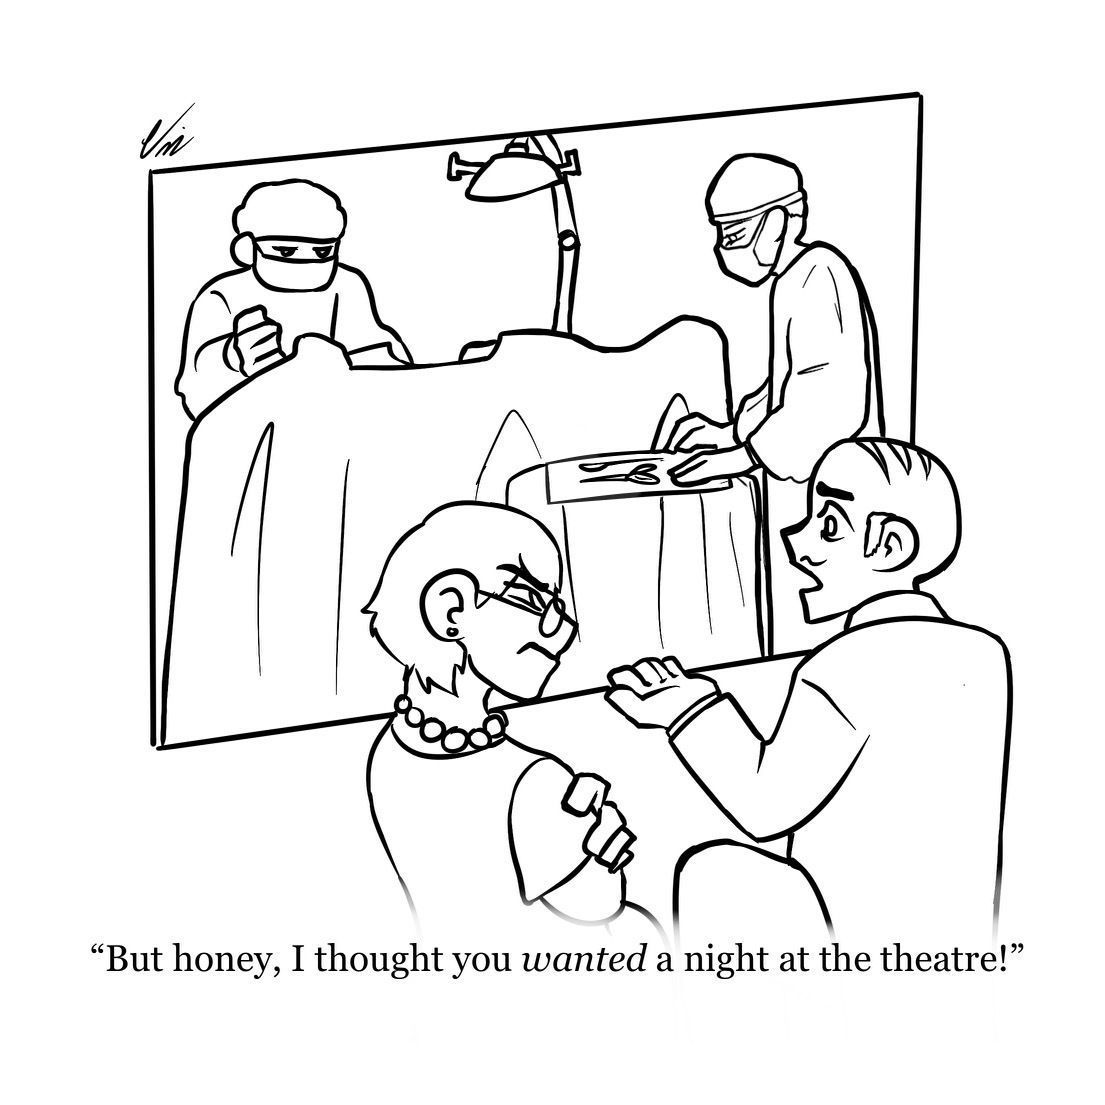 Are you a fan of the #operating theatre? Check out more 'critically-acclaimed' #medical #cartoons here: buff.ly/44KNzhA #MedTwitter #SoMeDocs #DocMatter #DocHumor #MedicalCartoon